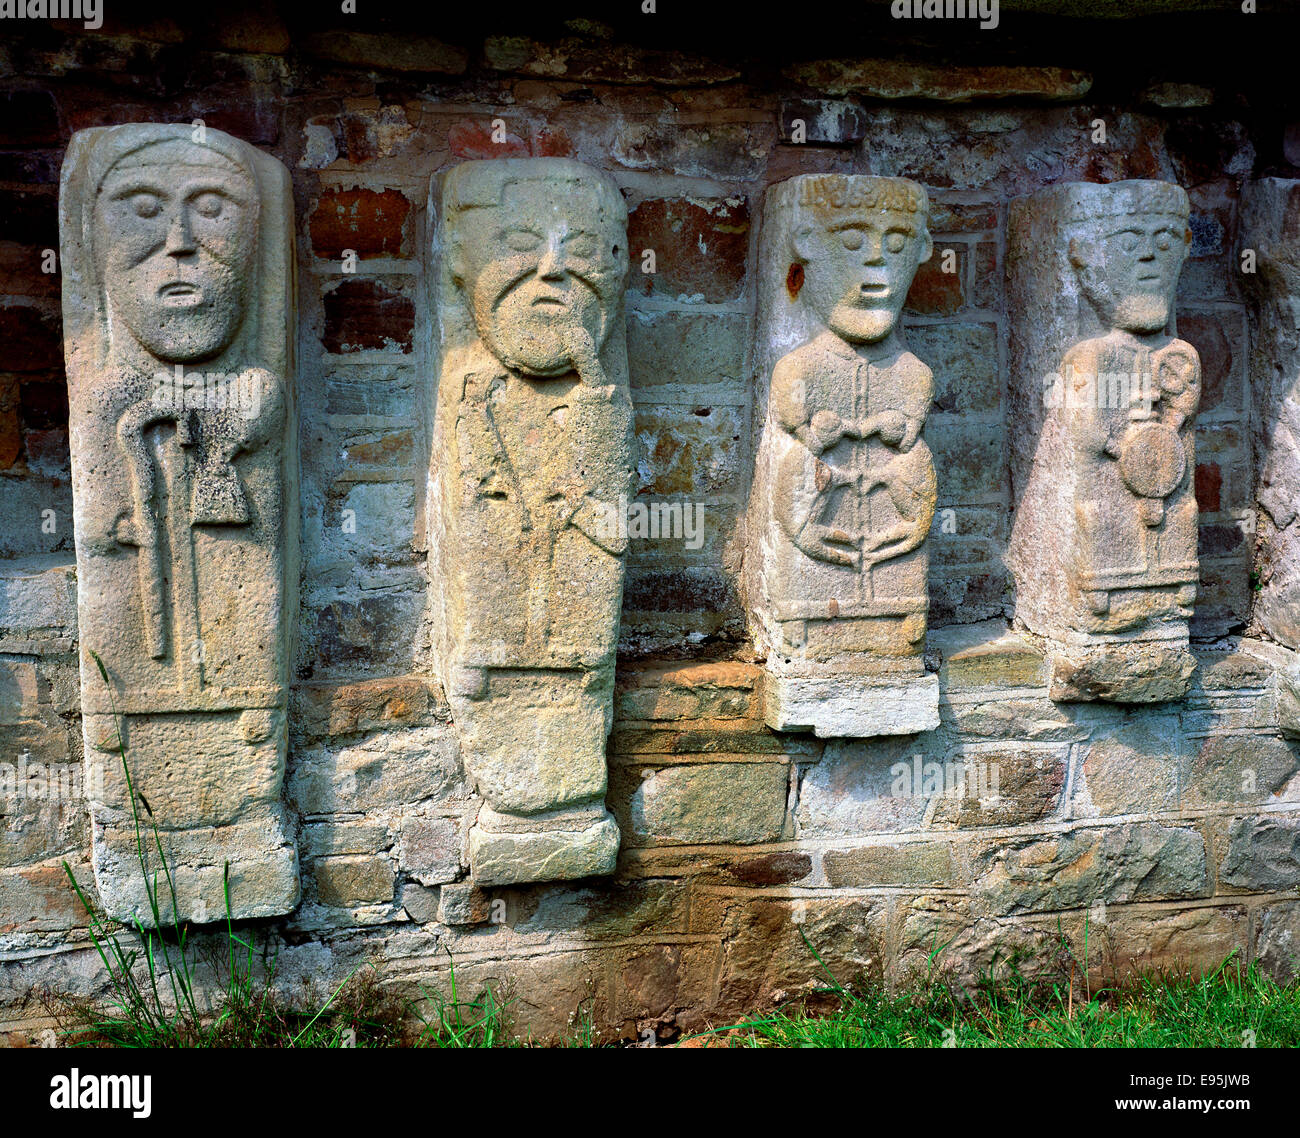 White island statues, Lower Lough Erne, Co. Fermanagh, Northern Ireland ...